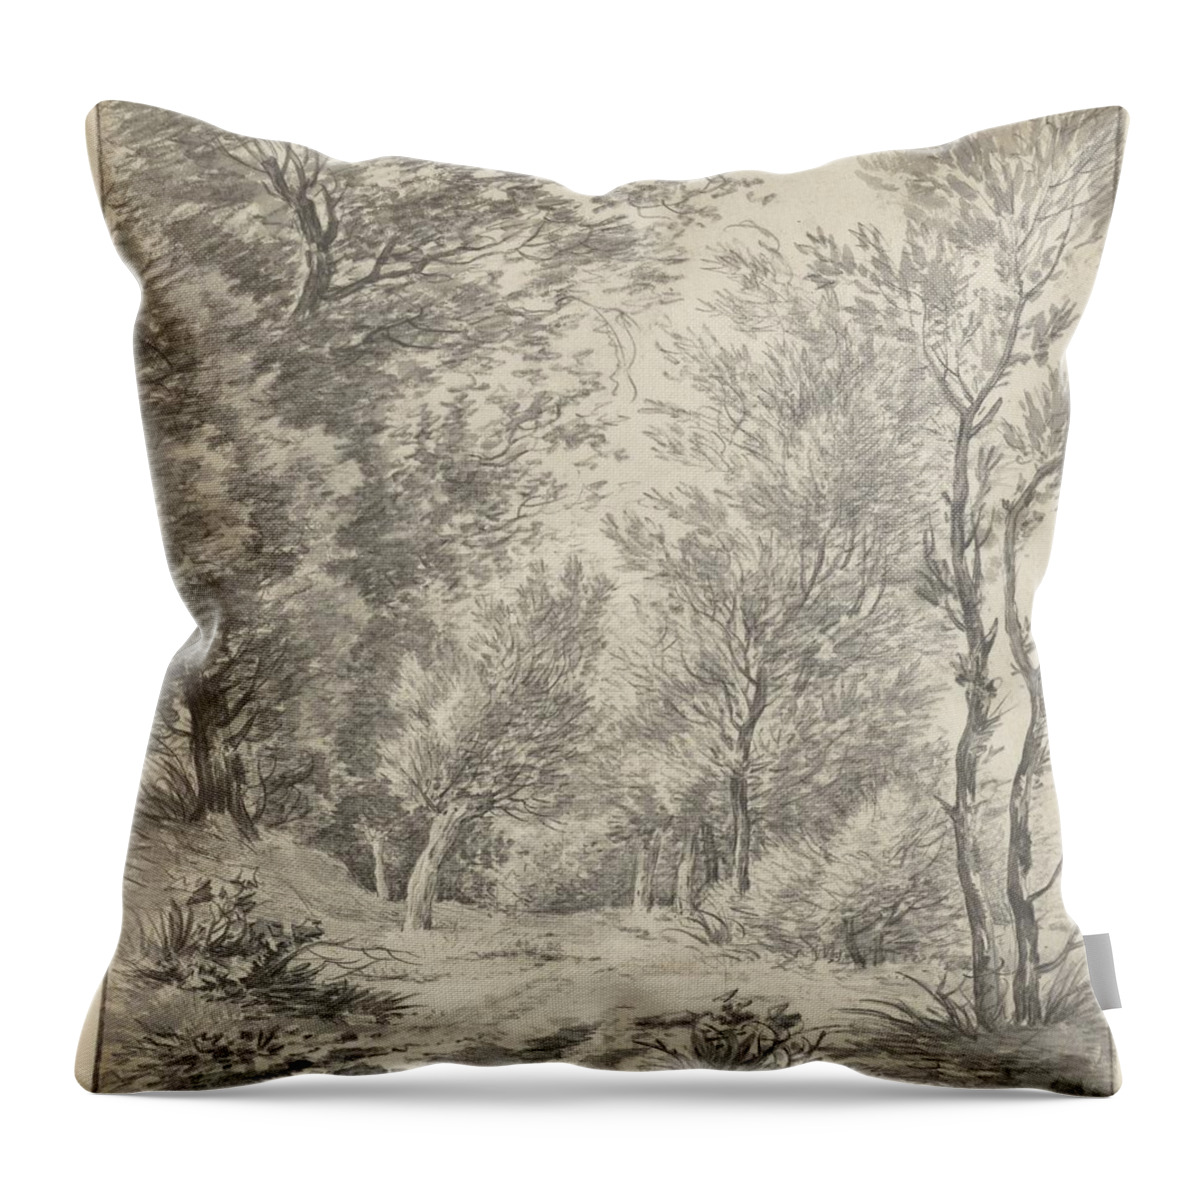 Vintage Throw Pillow featuring the painting Trees on the Amstelveense Weg, Hermanus Fock, 1776 by MotionAge Designs